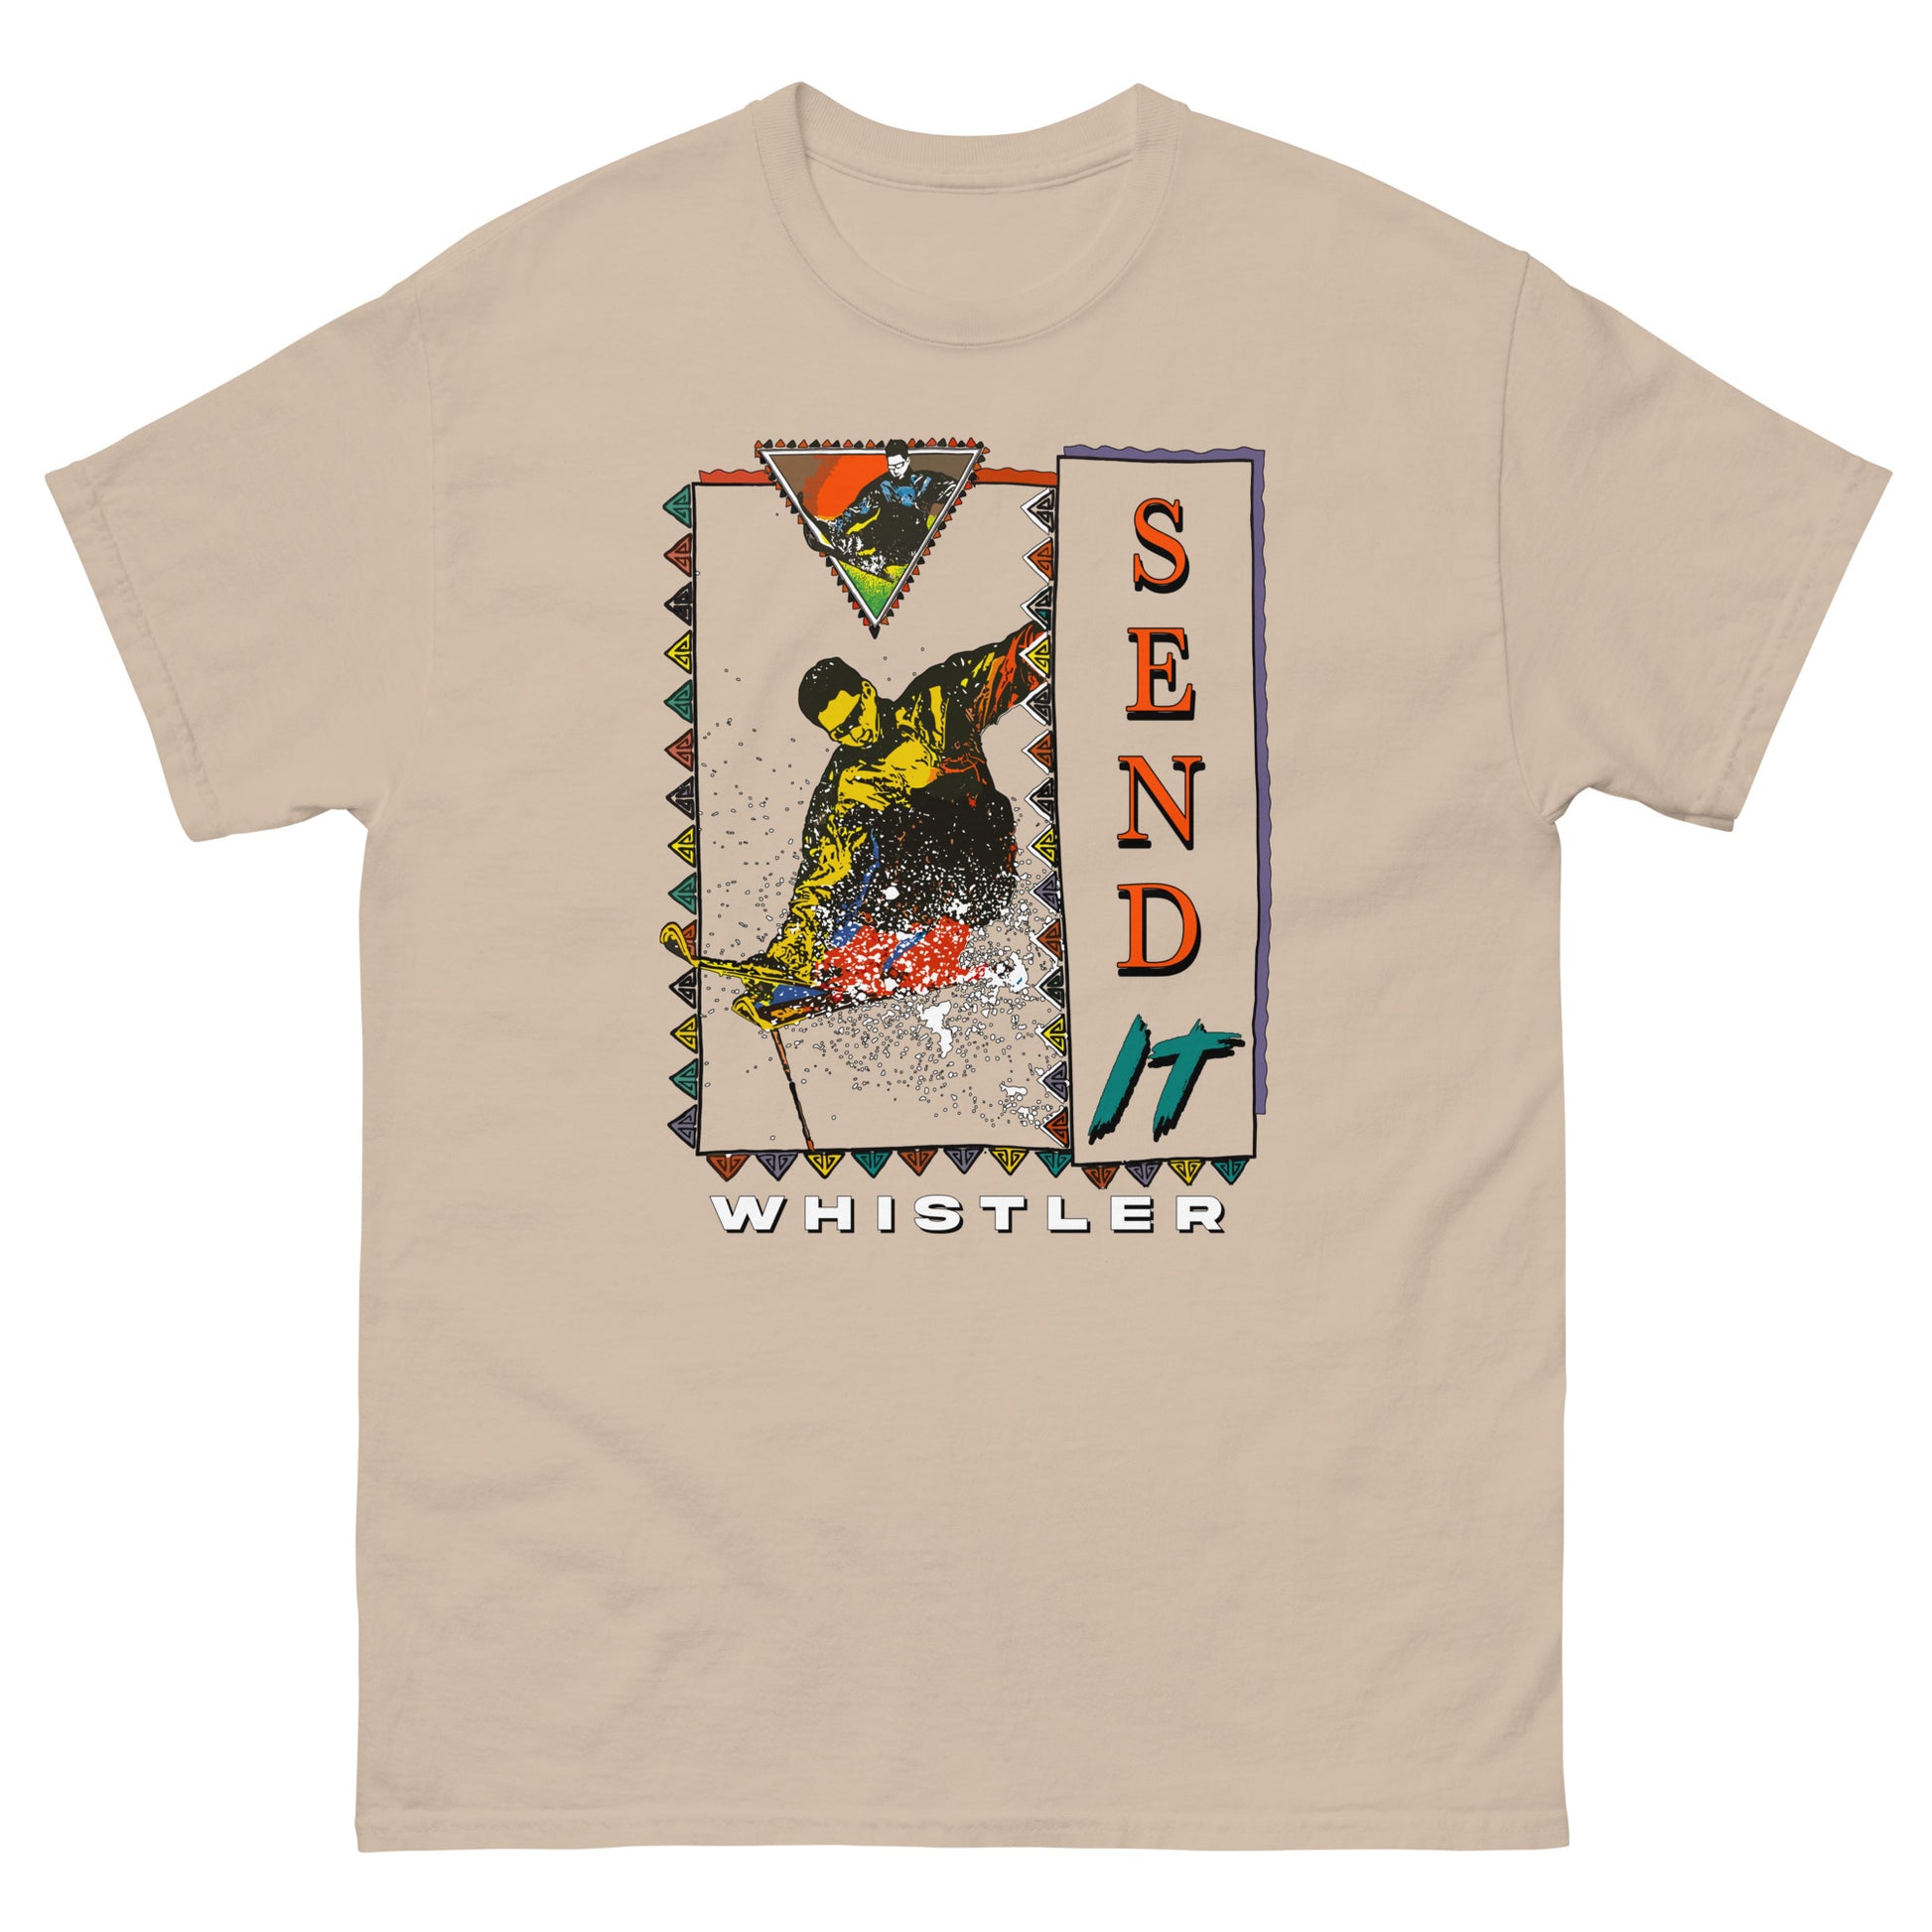 Send it Whistler printed on T-shirt by Whistler Shirts